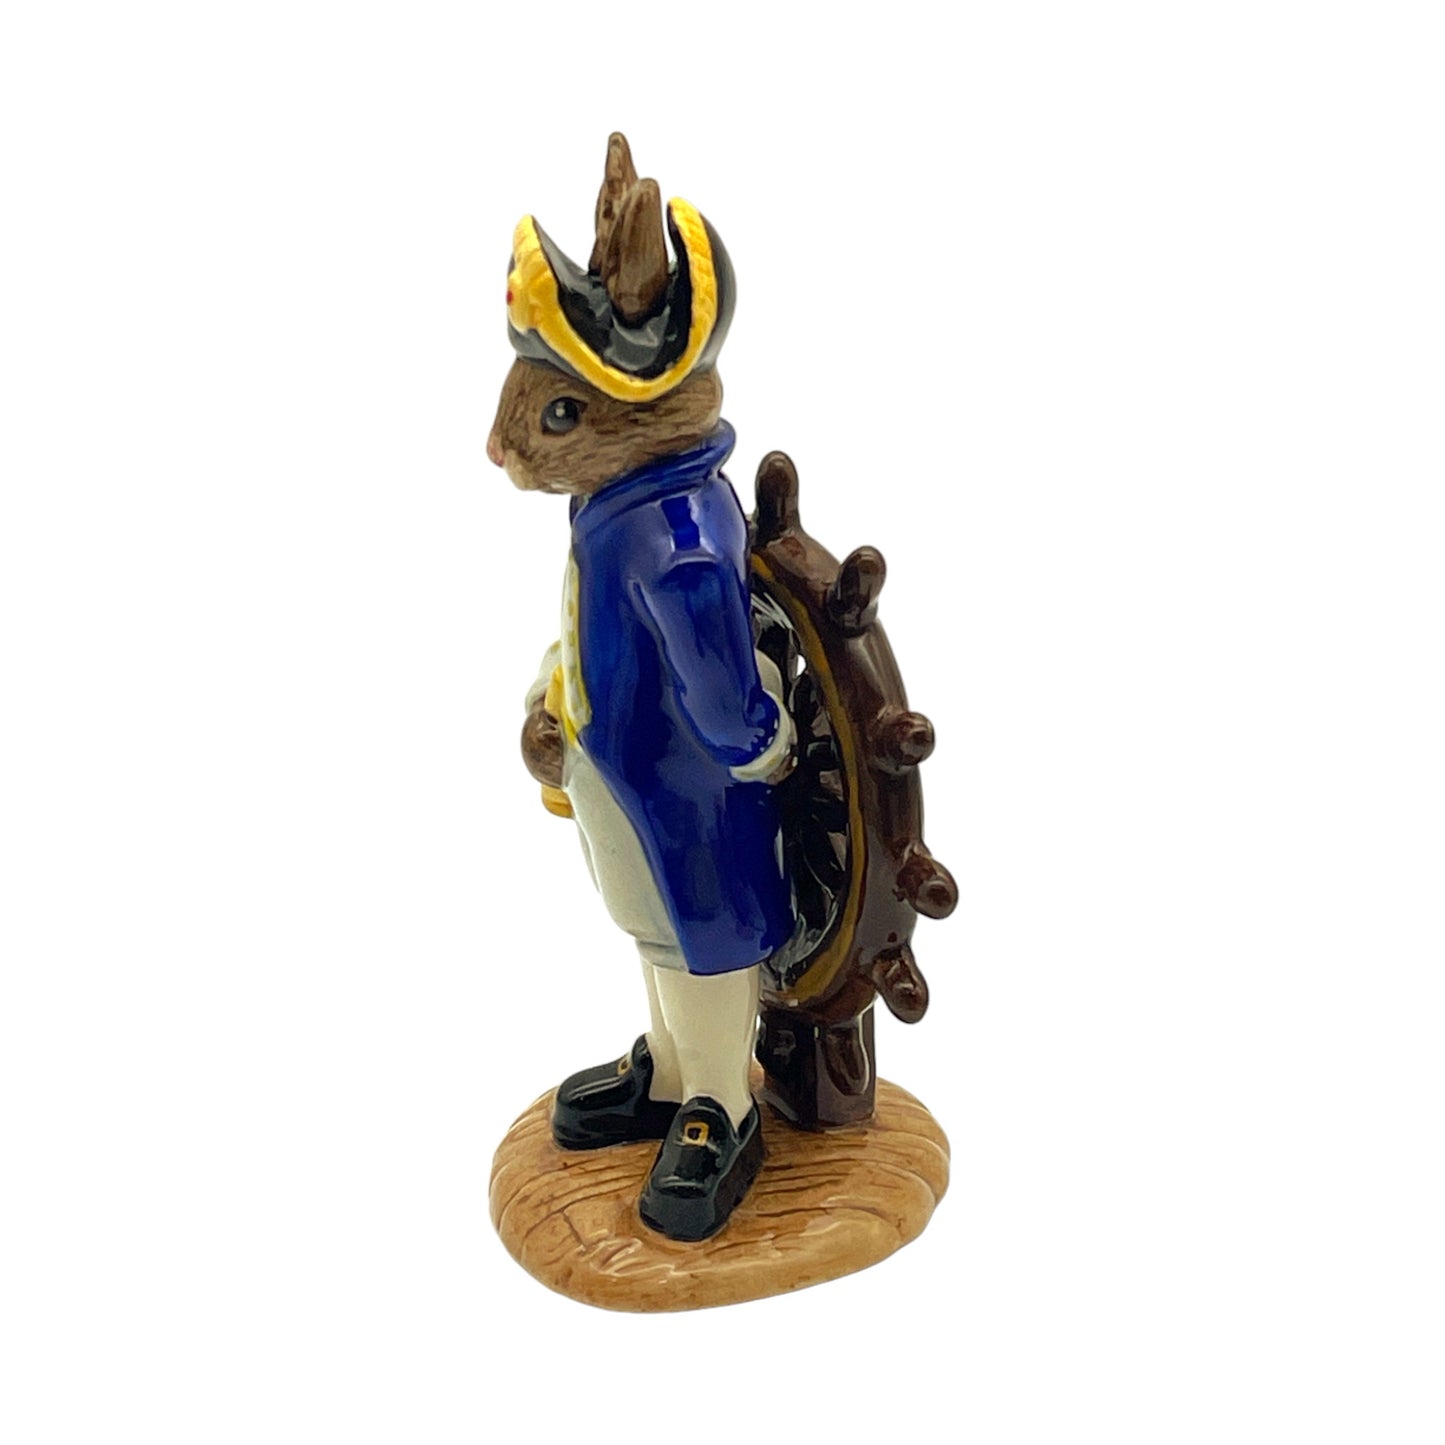 Royal Doulton Bunnykins - The Shipmates Collection Boatswain - Hand Made & Decorated - 2003  - 5"